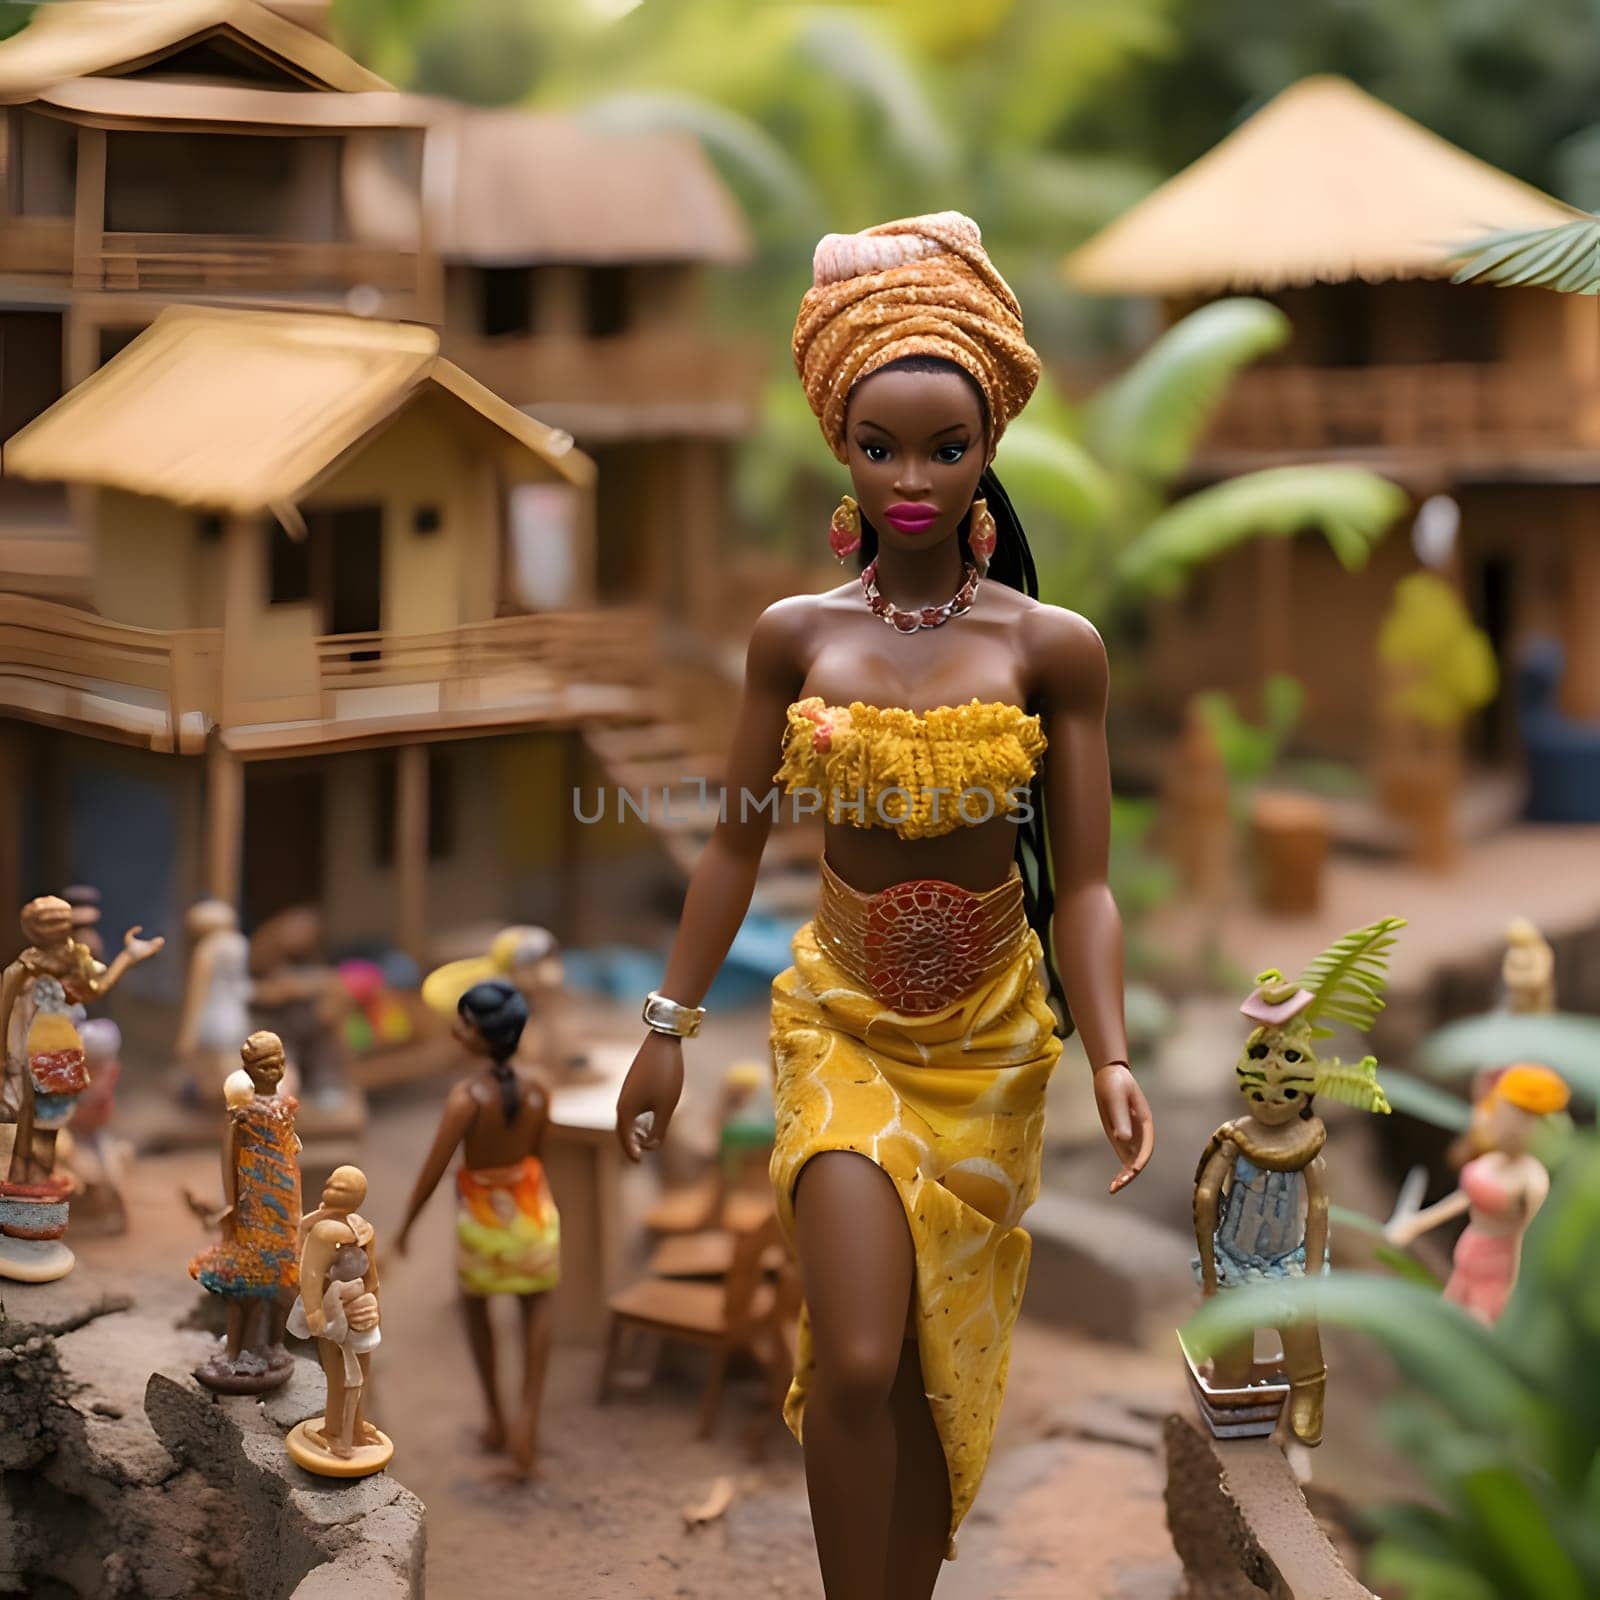 The black Barbie looks stunning in her rich outfit, radiating grace and beauty with every step she takes.